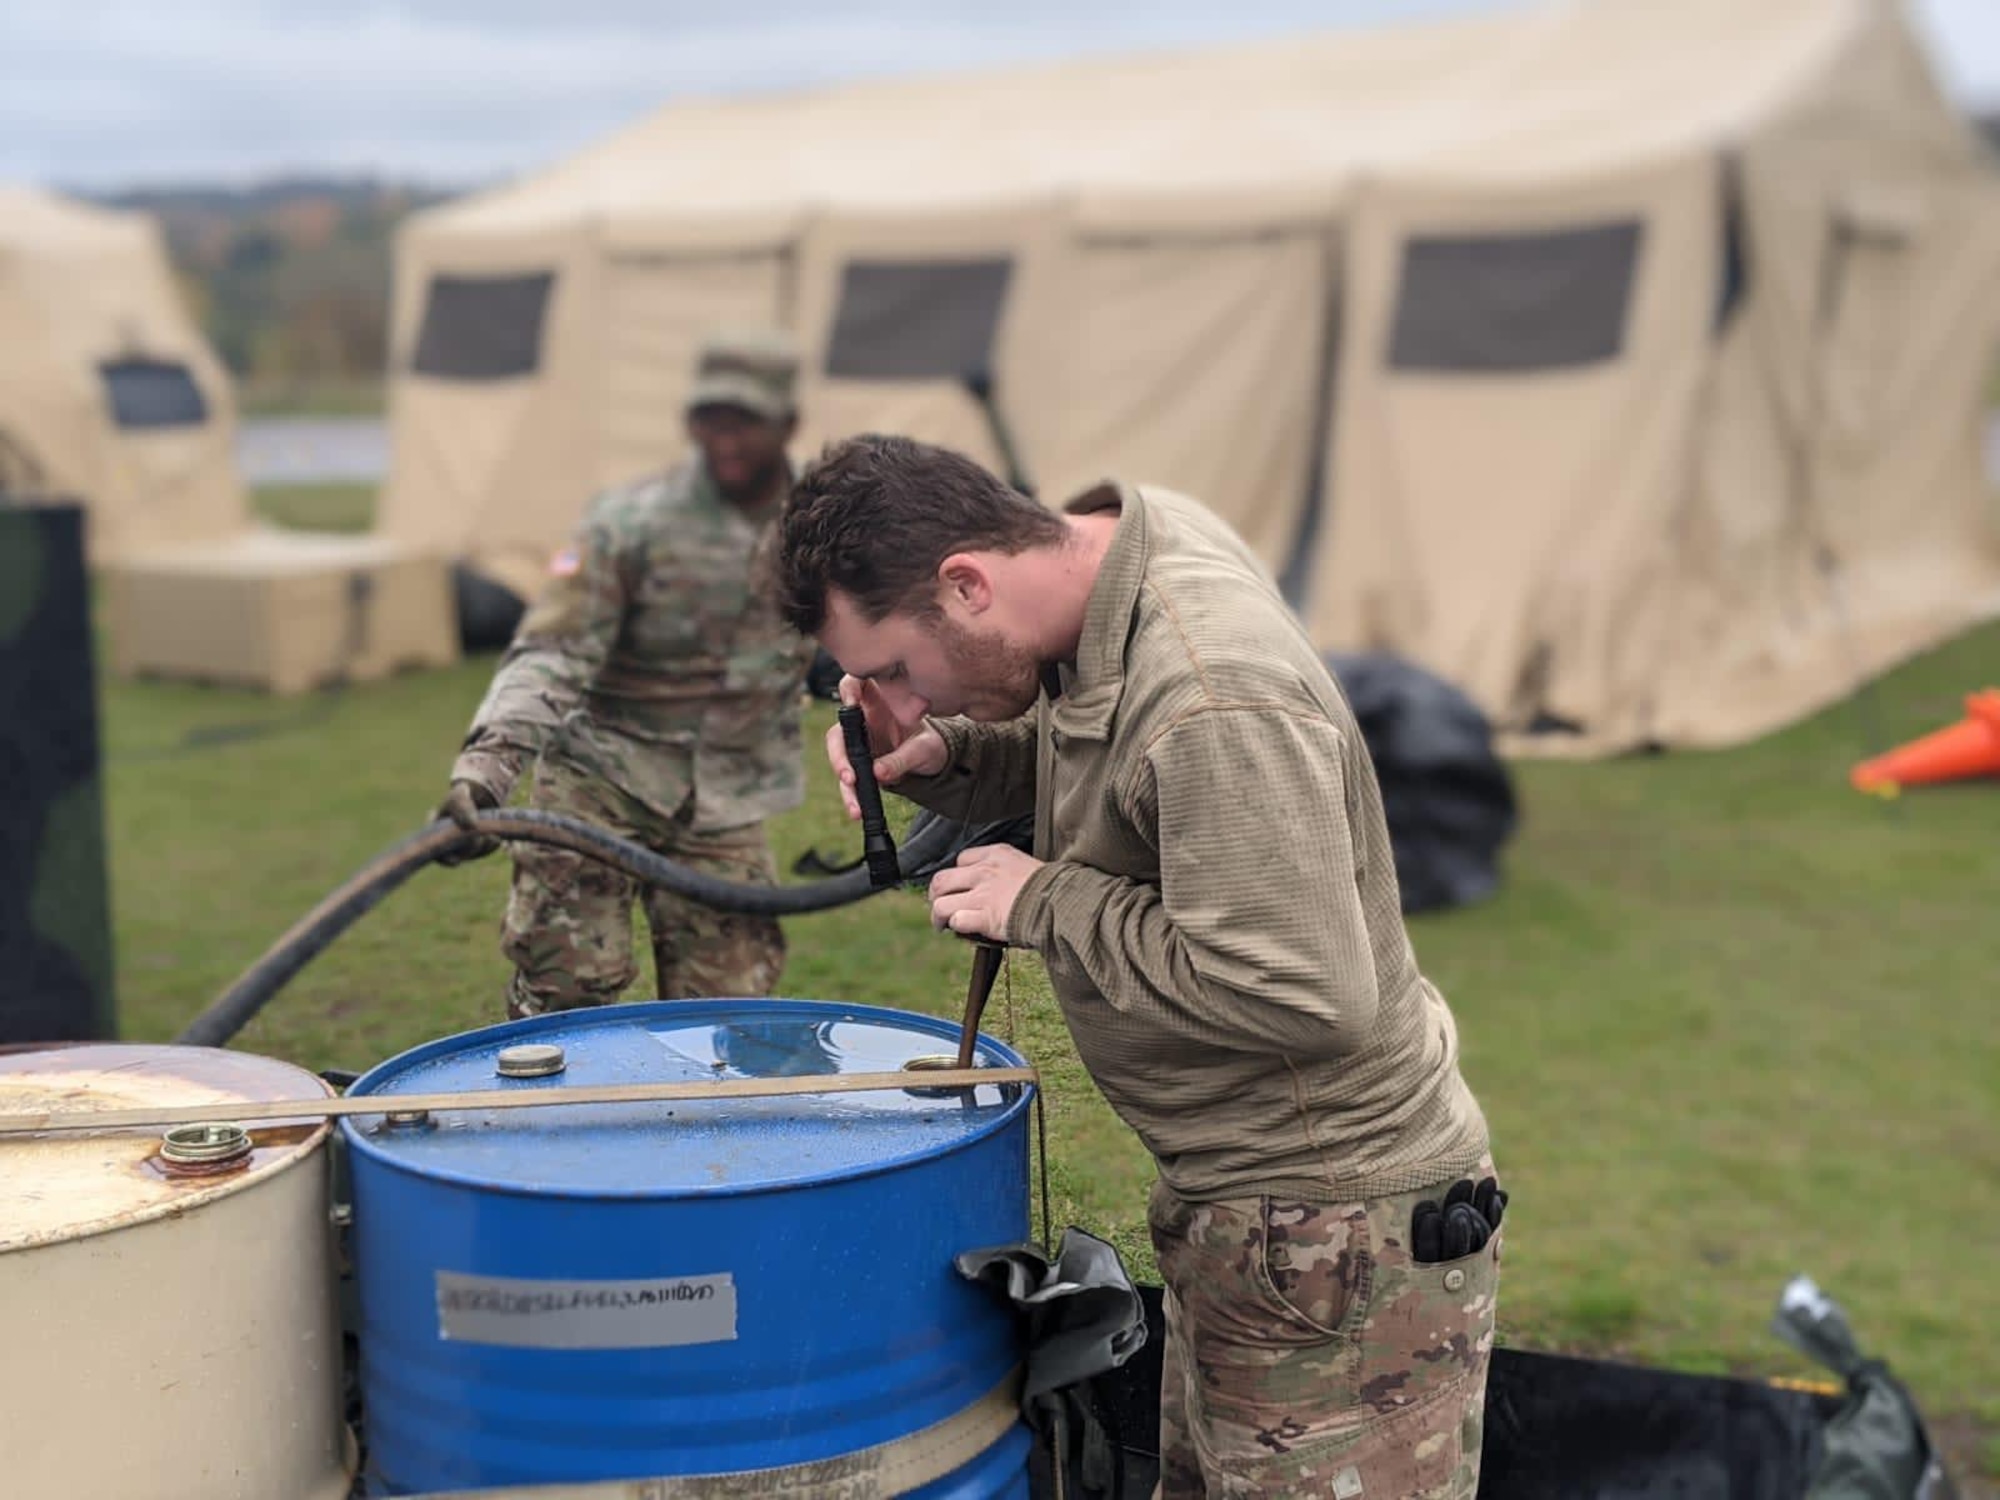 Photo of Airman checking fuel levels in a barrel